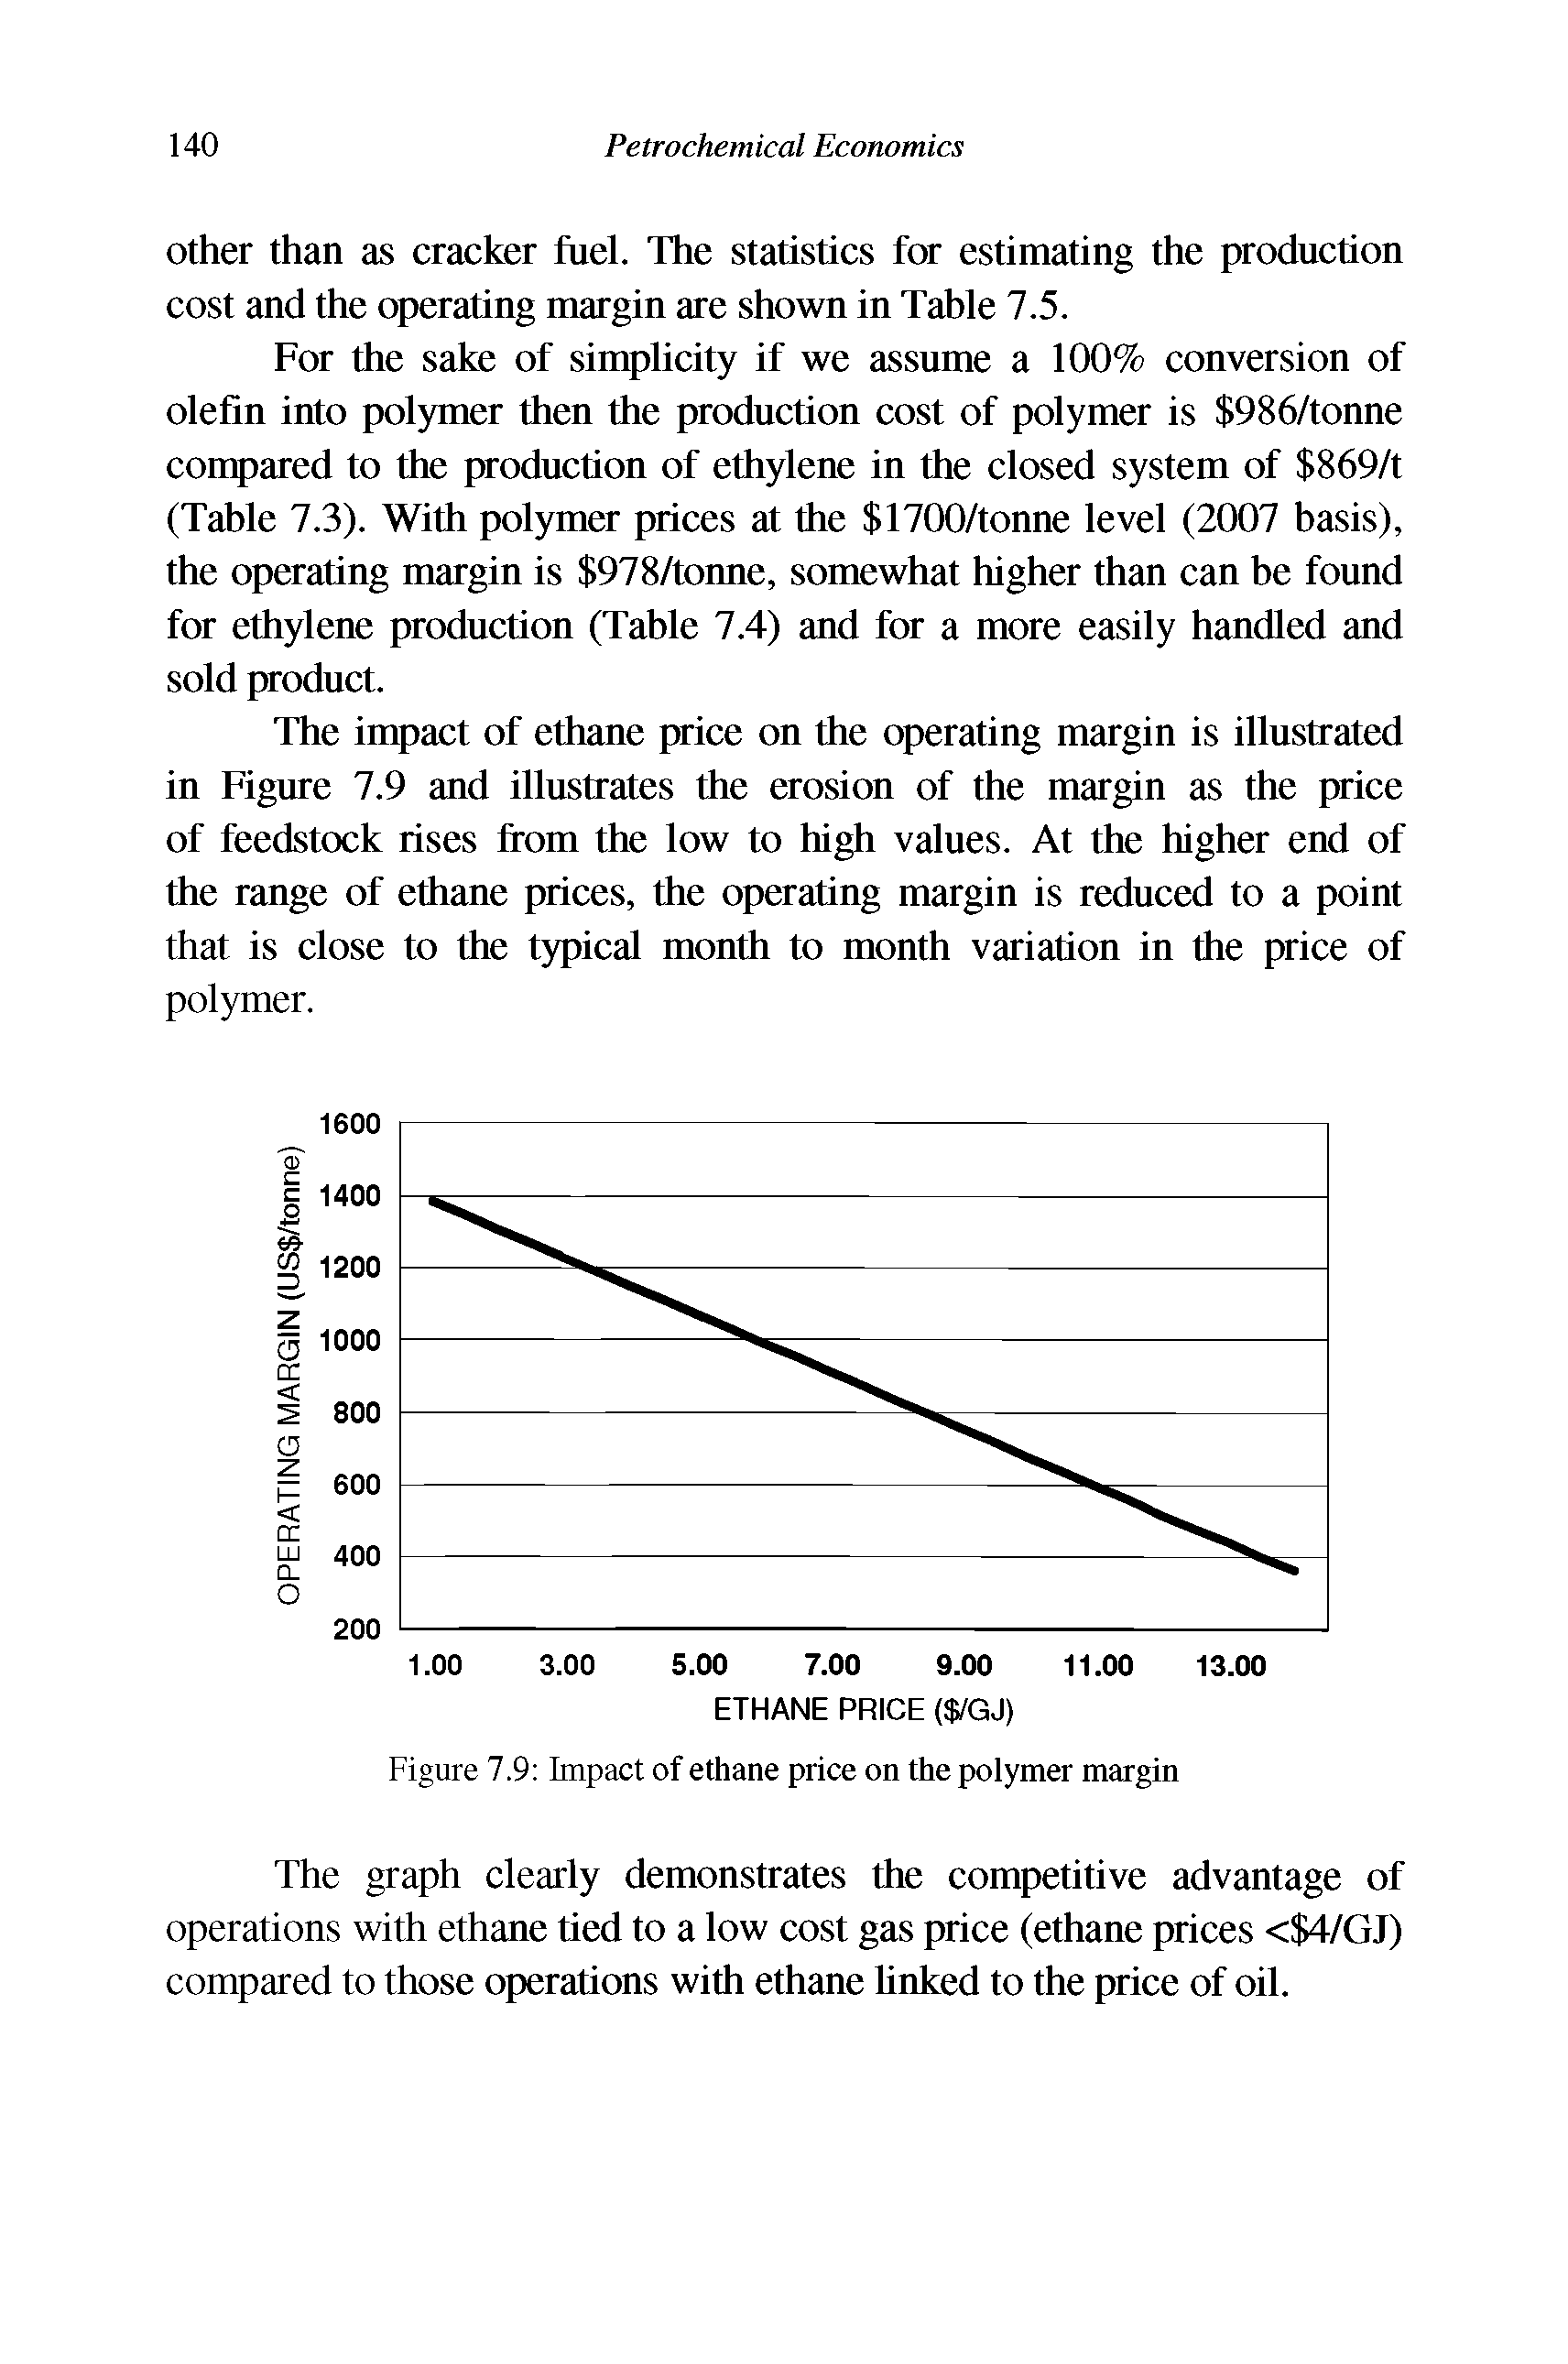 Figure 7.9 Impact of ethane price on the polymer margin...